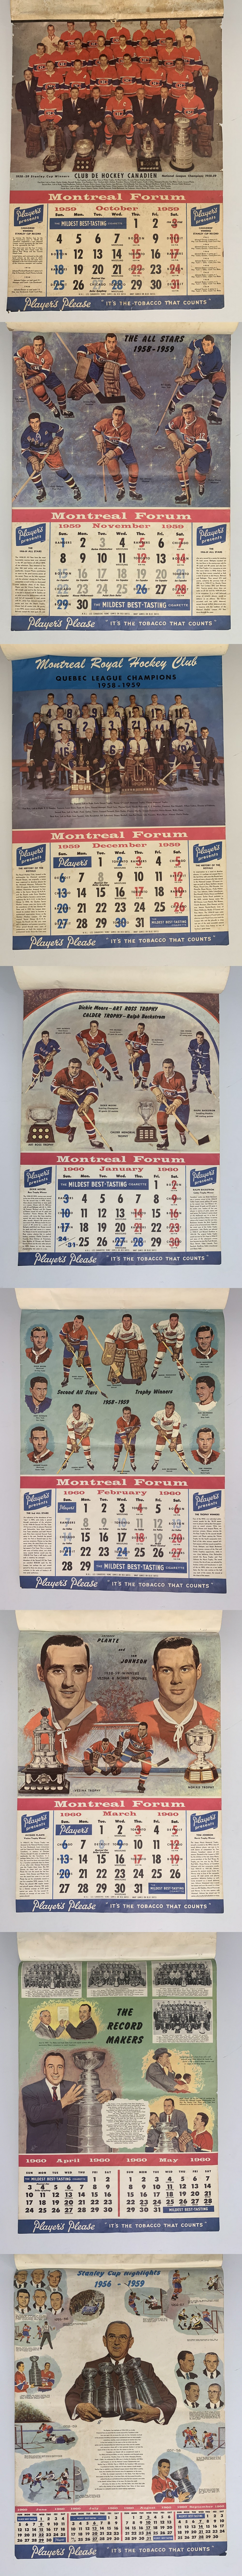 1959-60 PLAYER'S MONTREAL CANADIENS FULL CALENDAR photo